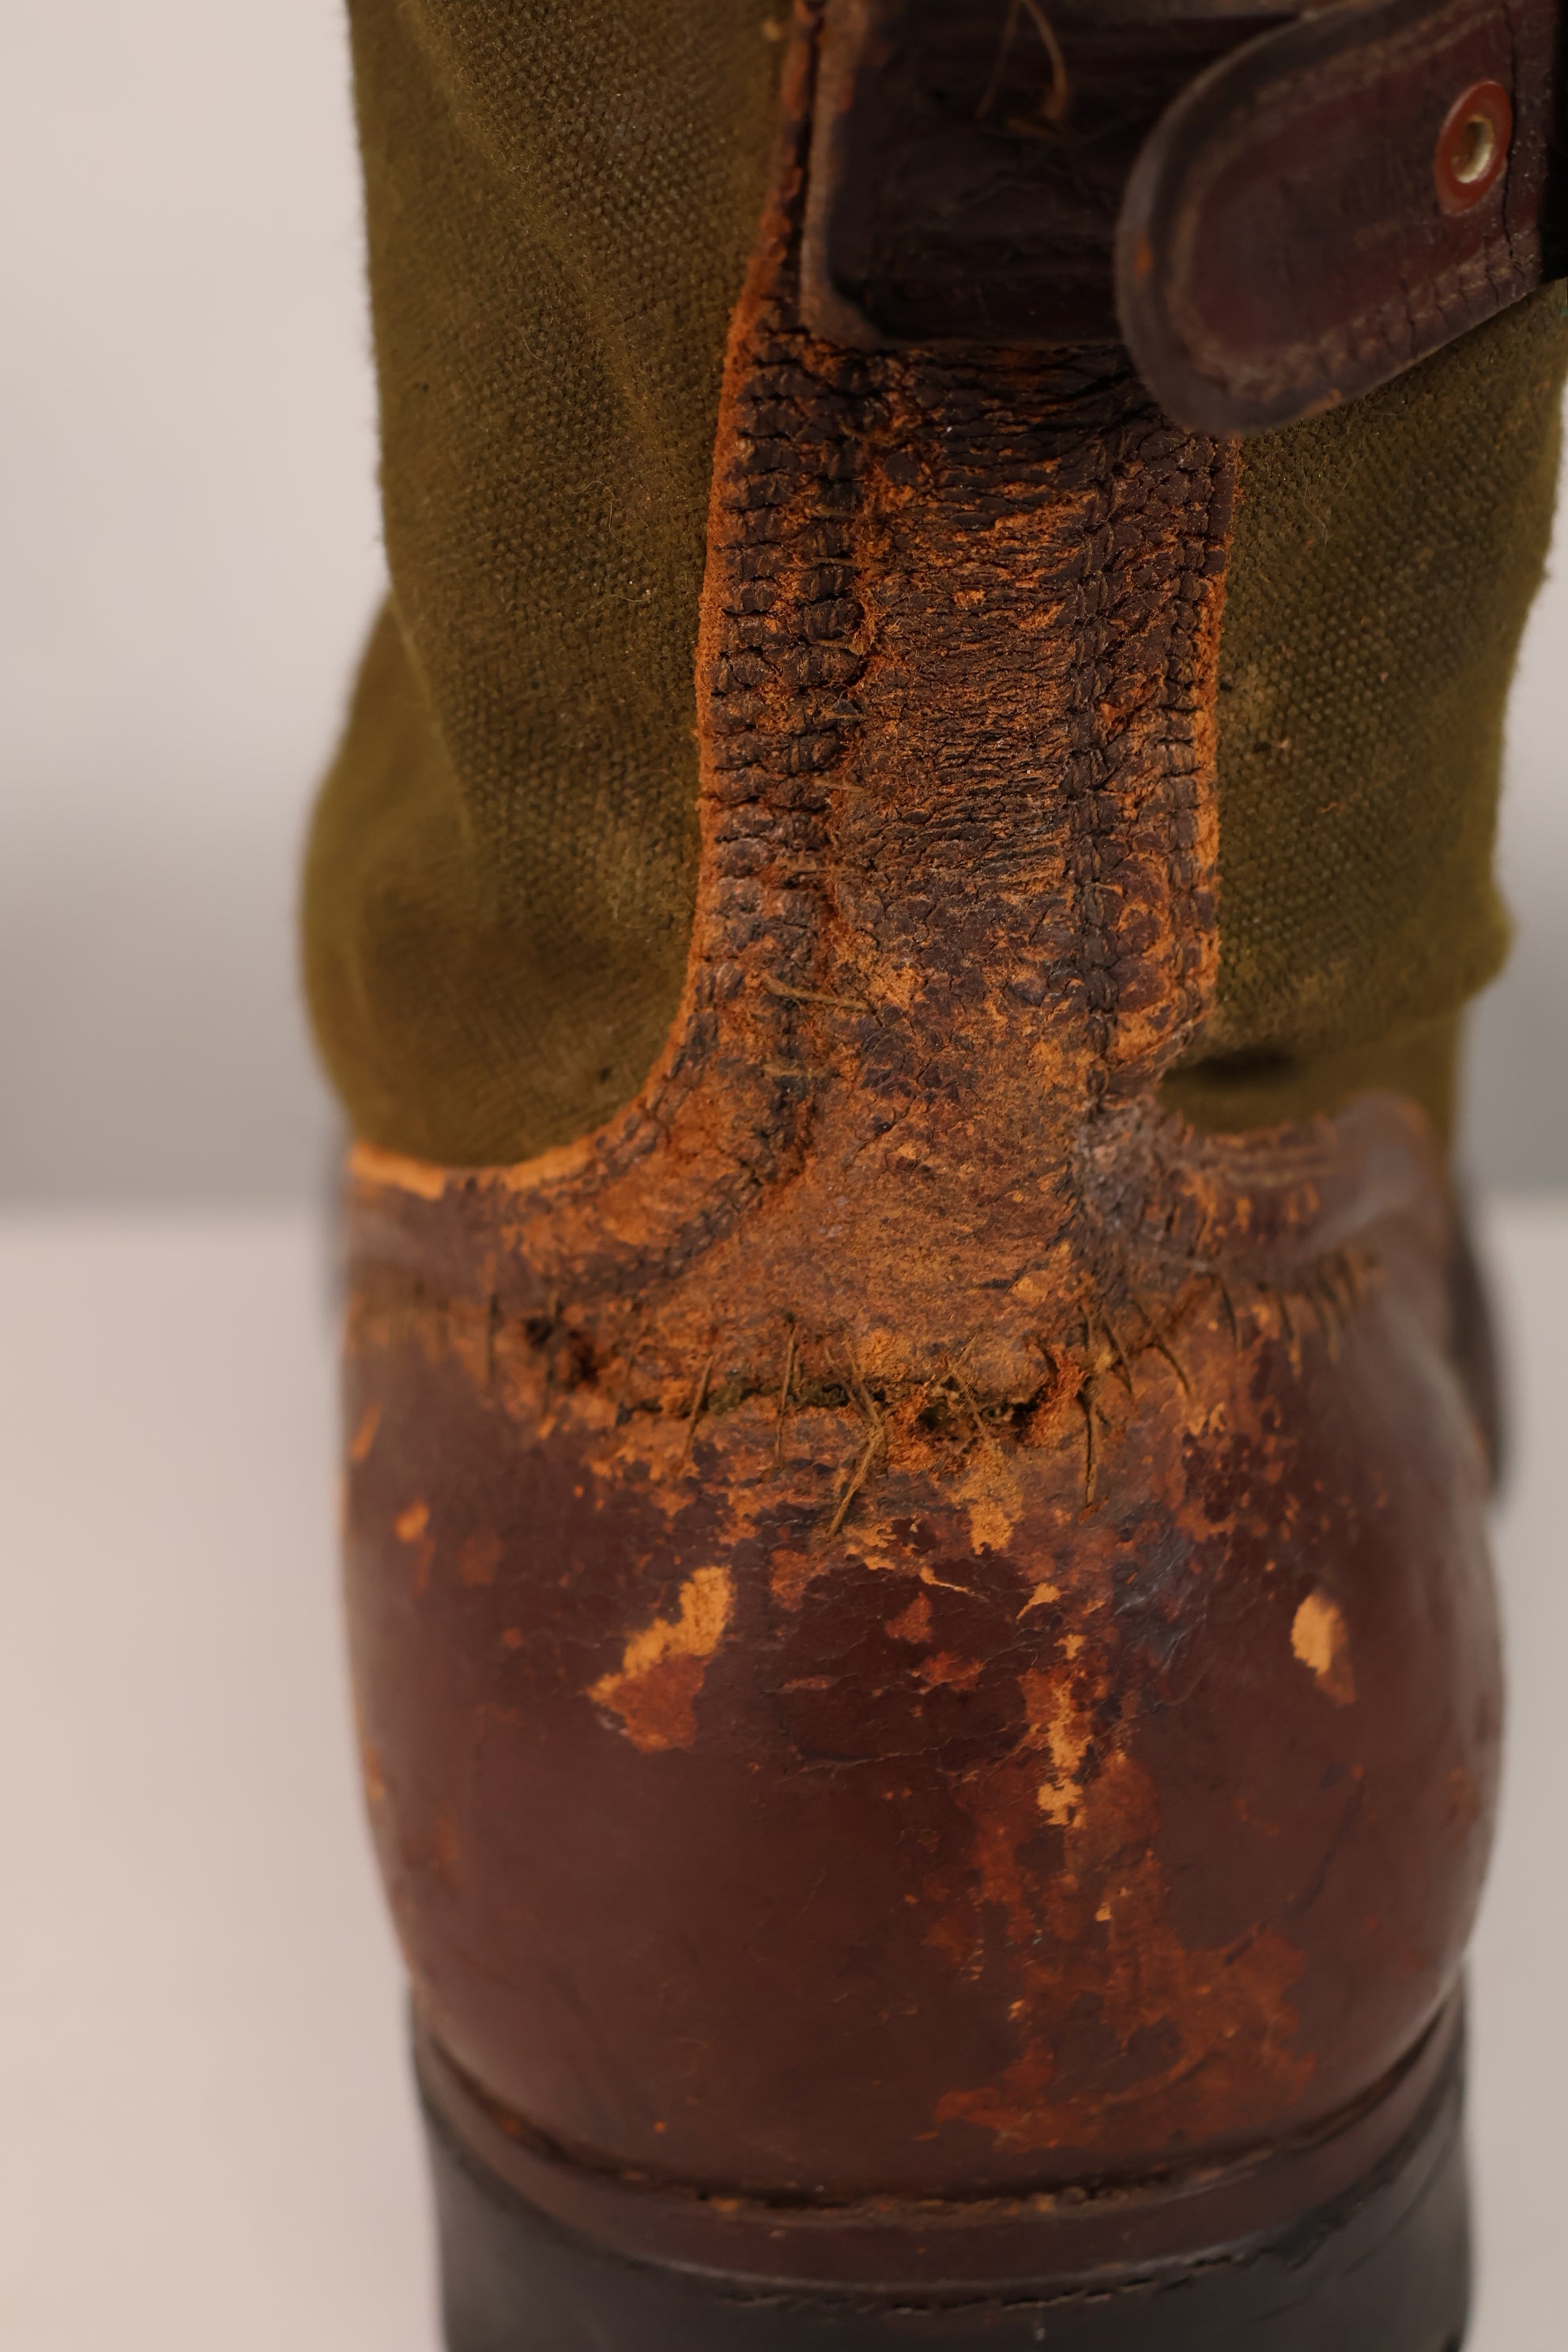 Actual 1951 tropical boots, commonly known as Okinawa boots, rare, used 10 27cm, large size